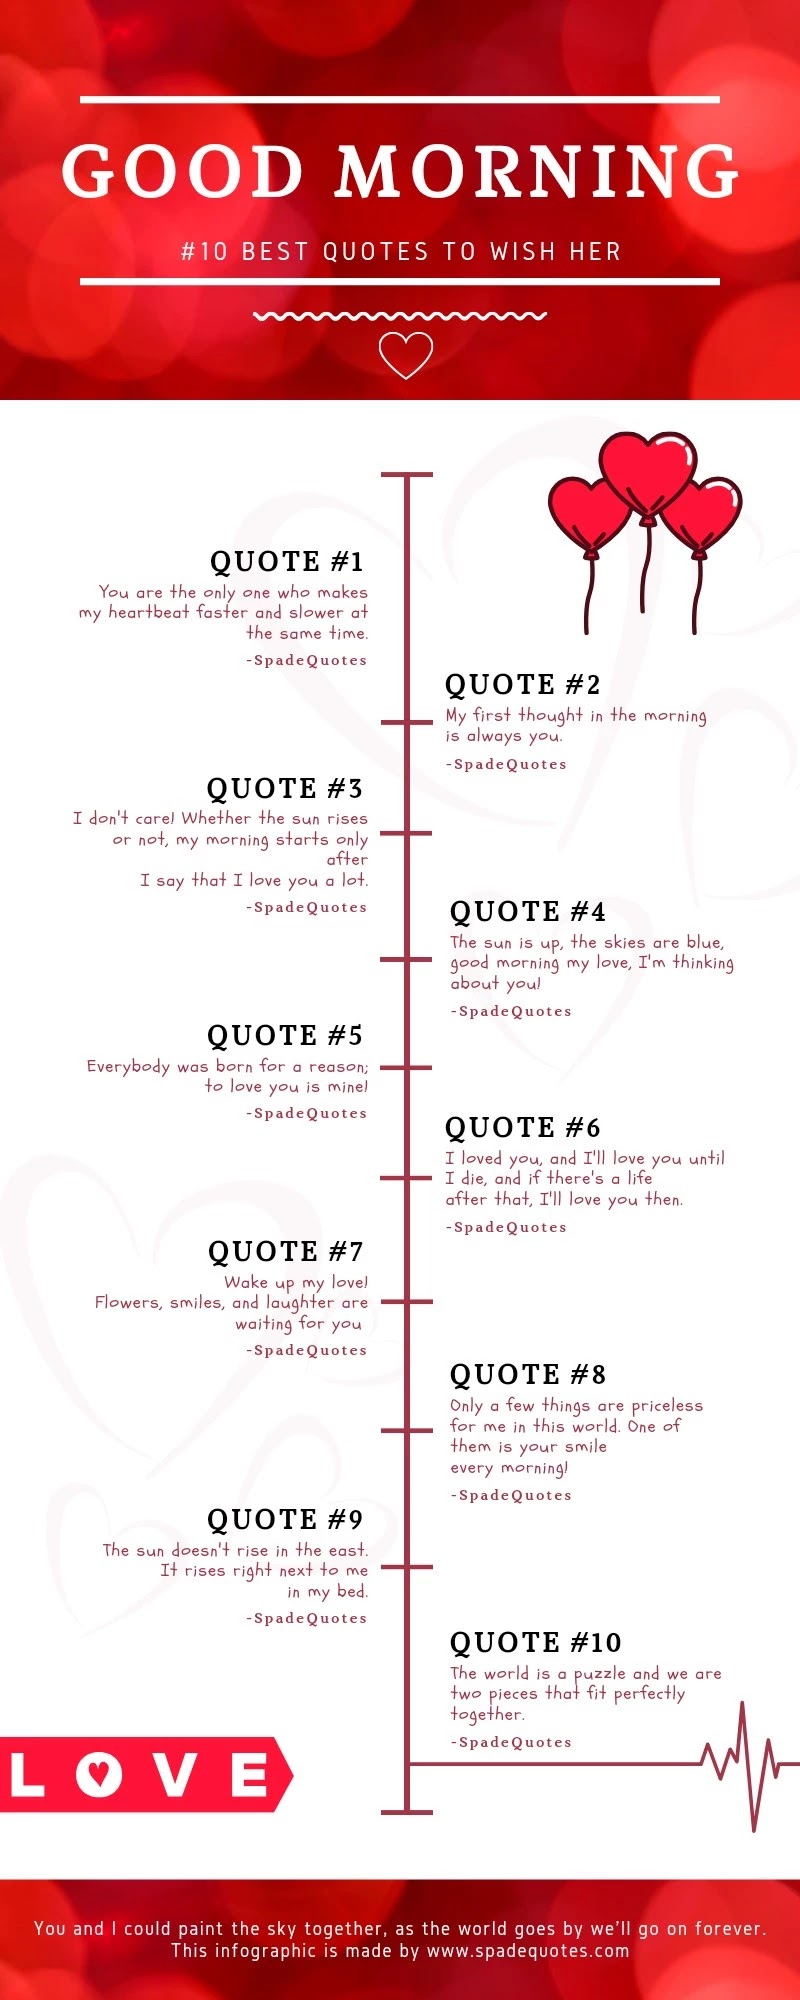 Romantic-good-morning-love-quotes-and-captions-inforgraphic-spadequotes